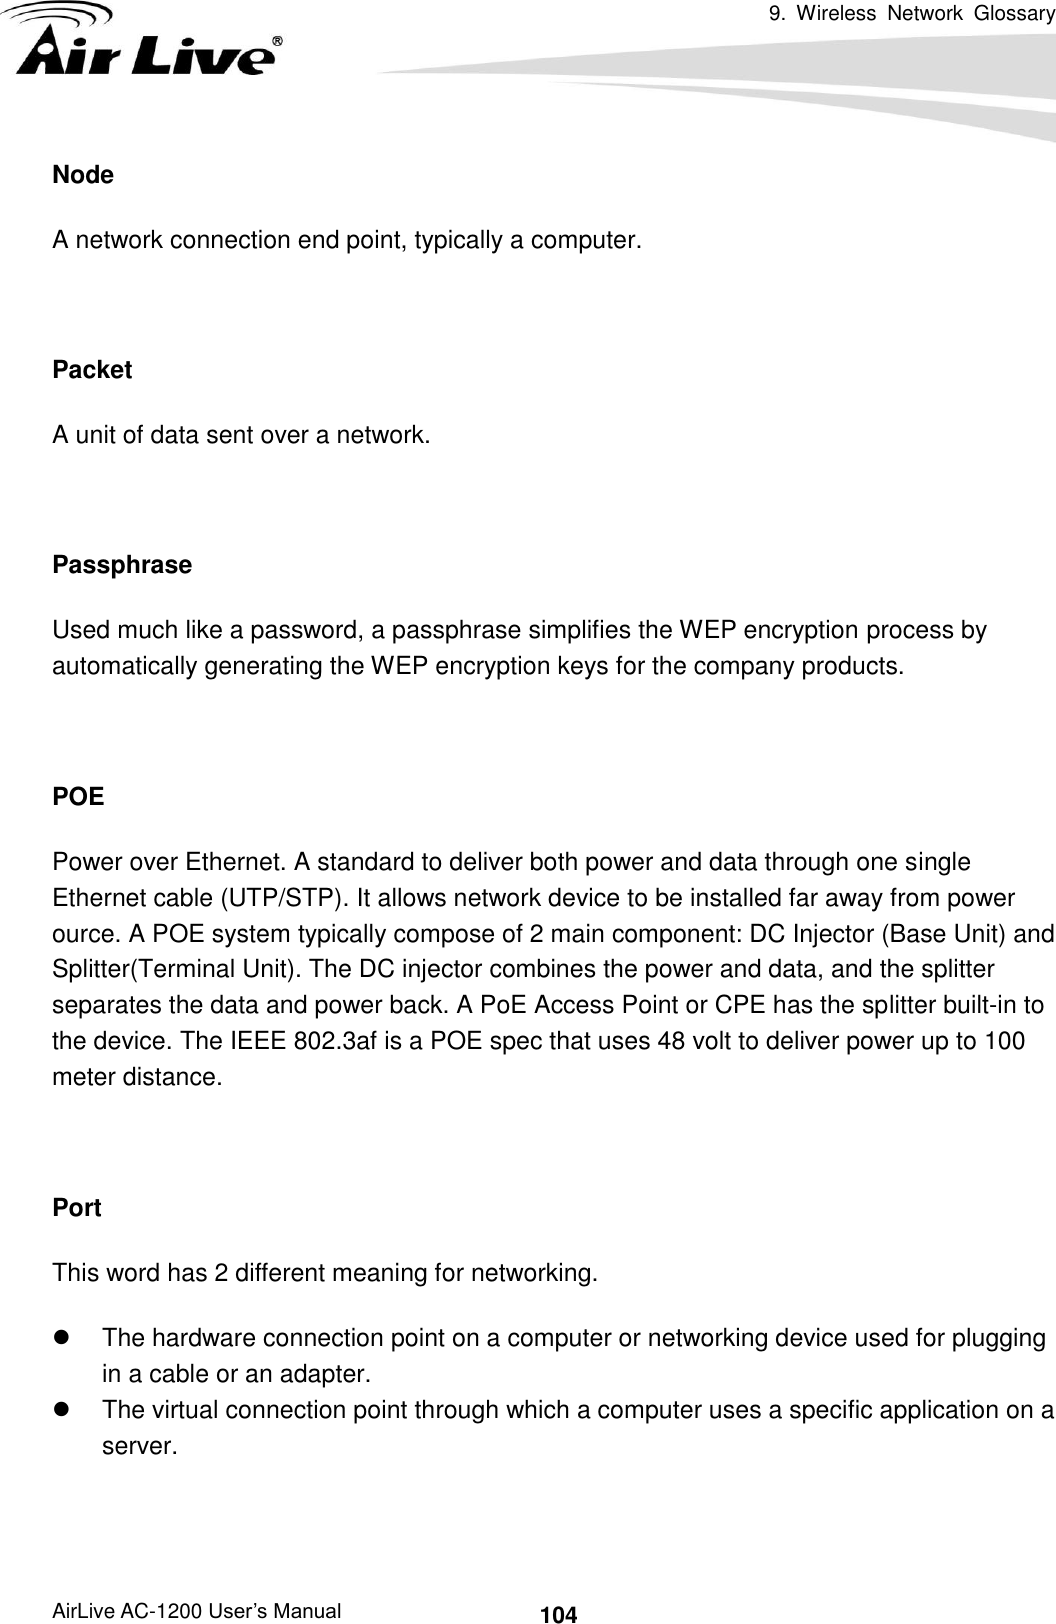 9.  Wireless  Network  Glossary      AirLive AC-1200 User’s Manual 104 Node A network connection end point, typically a computer.  Packet A unit of data sent over a network.  Passphrase Used much like a password, a passphrase simplifies the WEP encryption process by automatically generating the WEP encryption keys for the company products.  POE Power over Ethernet. A standard to deliver both power and data through one single Ethernet cable (UTP/STP). It allows network device to be installed far away from power ource. A POE system typically compose of 2 main component: DC Injector (Base Unit) and Splitter(Terminal Unit). The DC injector combines the power and data, and the splitter separates the data and power back. A PoE Access Point or CPE has the splitter built-in to the device. The IEEE 802.3af is a POE spec that uses 48 volt to deliver power up to 100 meter distance.  Port This word has 2 different meaning for networking.   The hardware connection point on a computer or networking device used for plugging in a cable or an adapter.   The virtual connection point through which a computer uses a specific application on a server.  